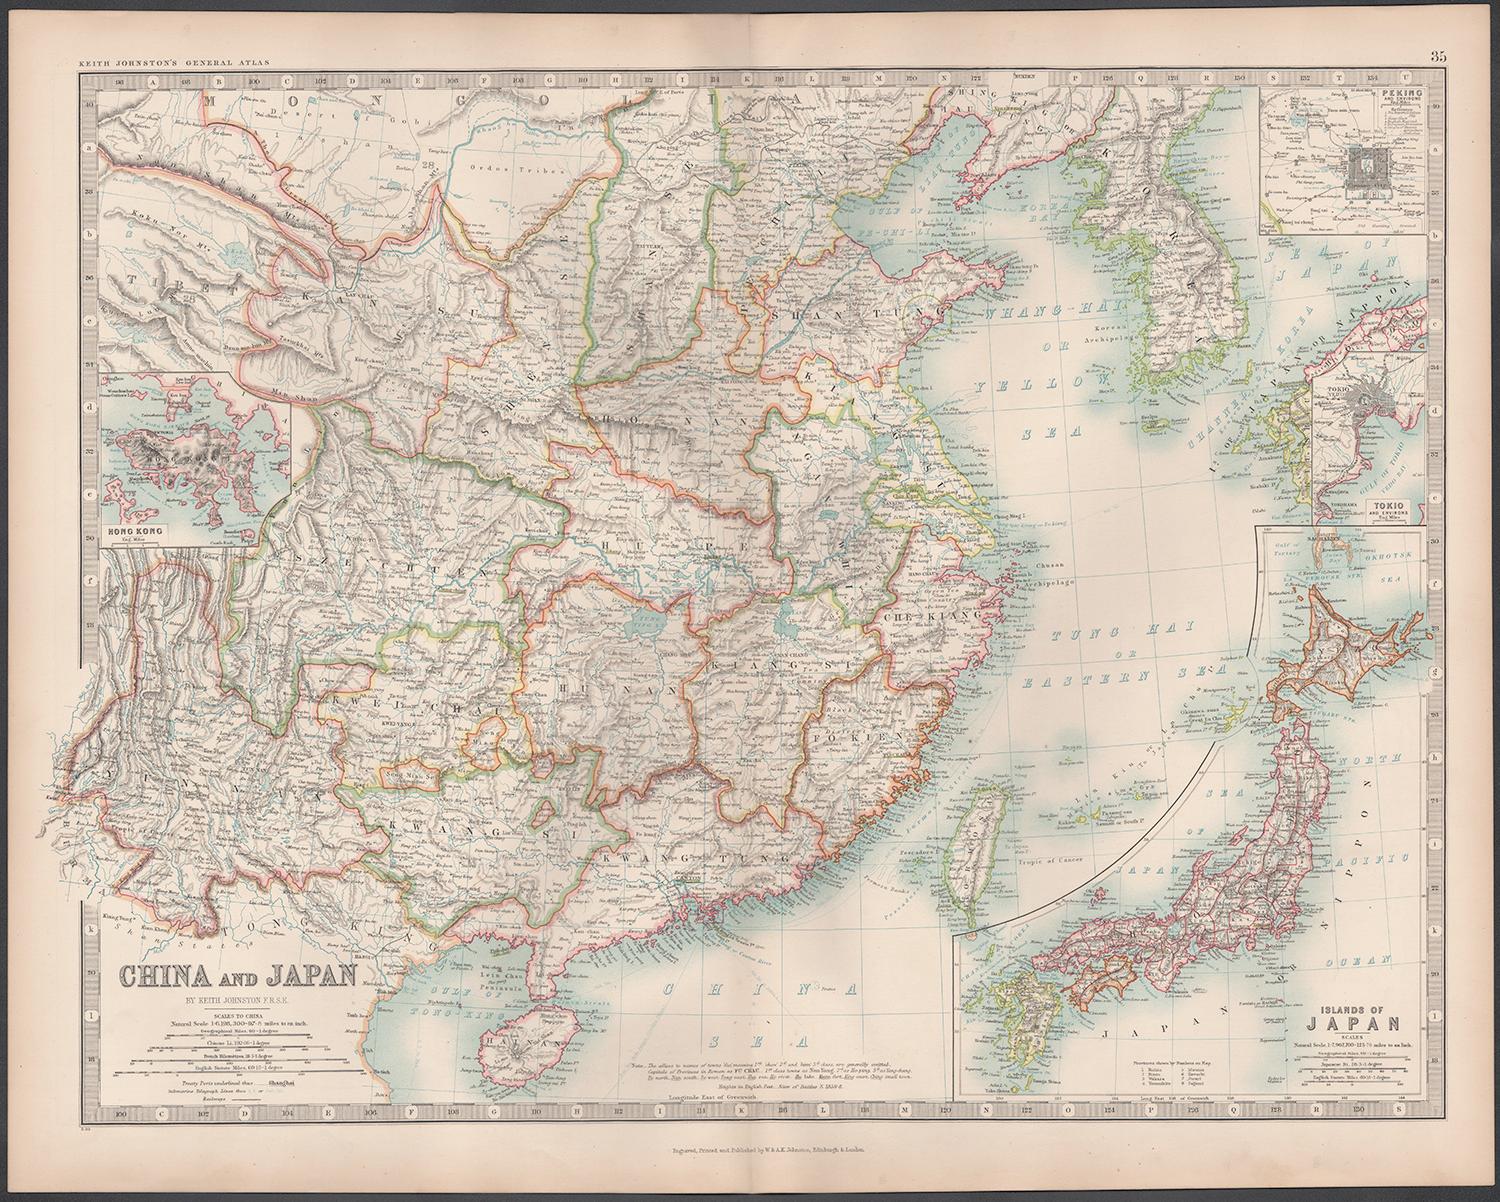 China and Japan, English antique map by Alexander Keith Johnston, 1901